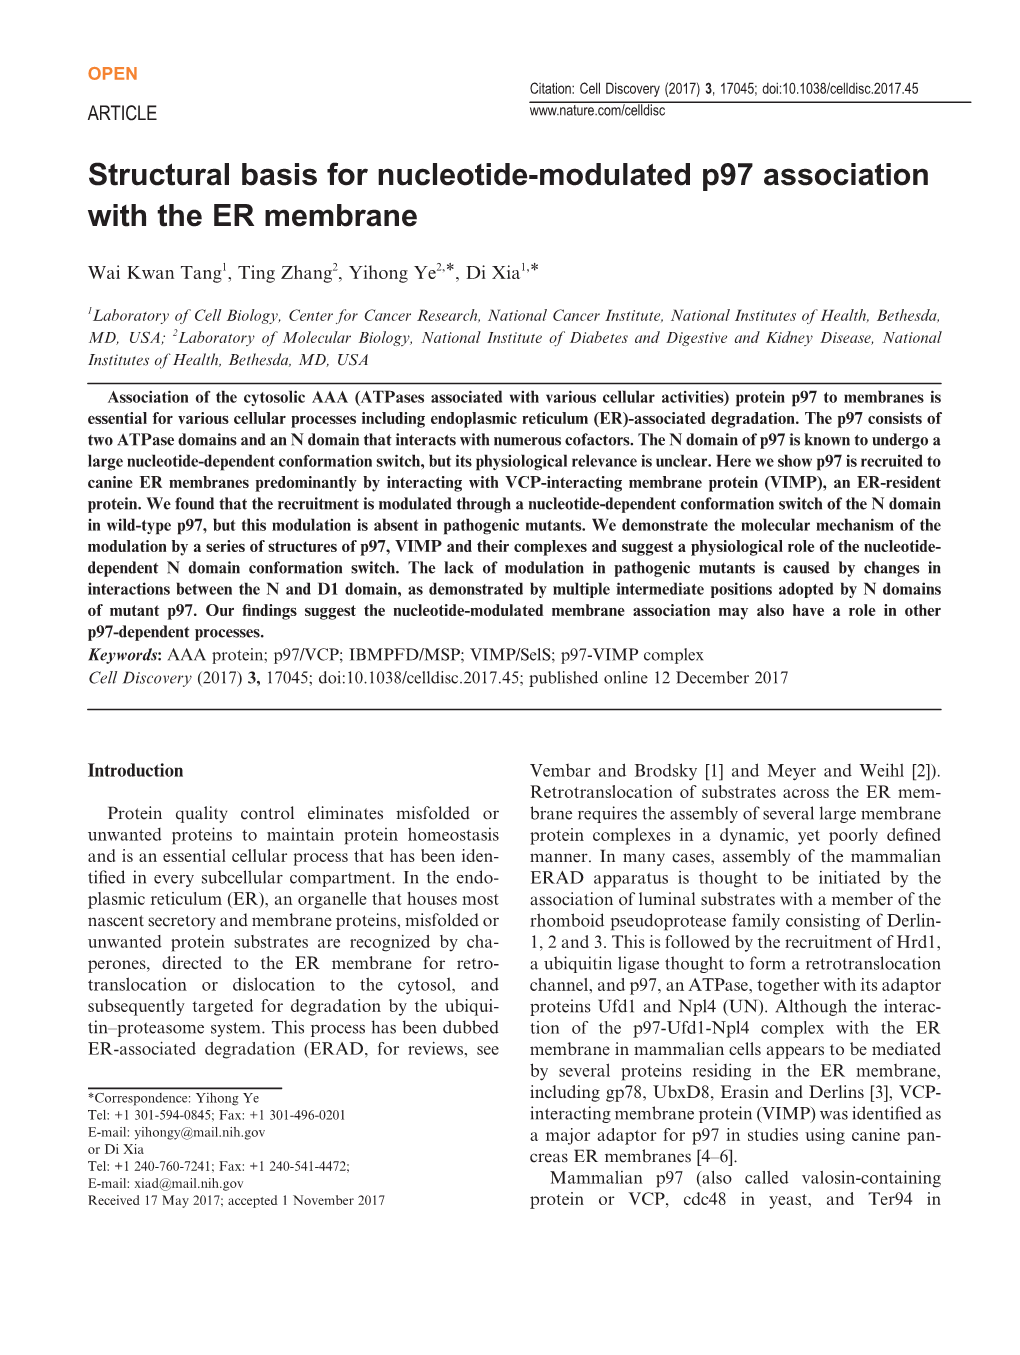 Structural Basis for Nucleotide-Modulated P97 Association with the ER Membrane